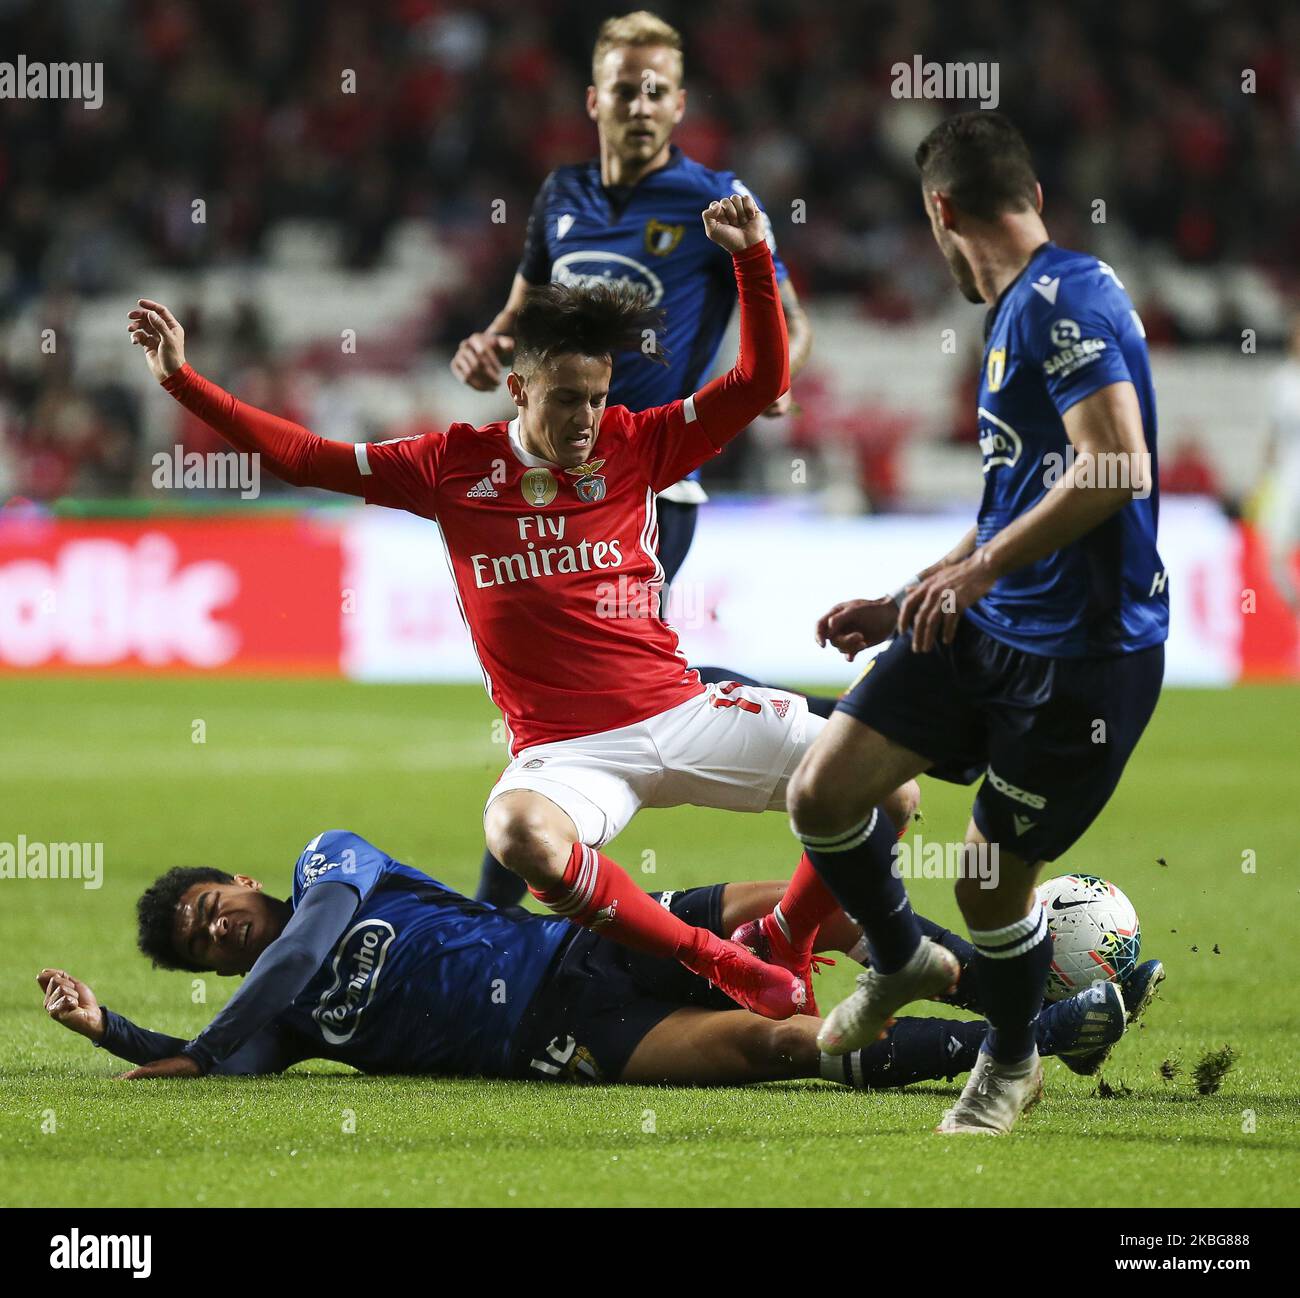 SL Benfica Forward Franco Cervi in action during the Taca de Portugal Semi Finals match between SL Benfica and FC Famalicao at Estadio da Luz on February 4, 2020 in Lisbon, Portugal. (Photo by Paulo Nascimento/NurPhoto) Stock Photo